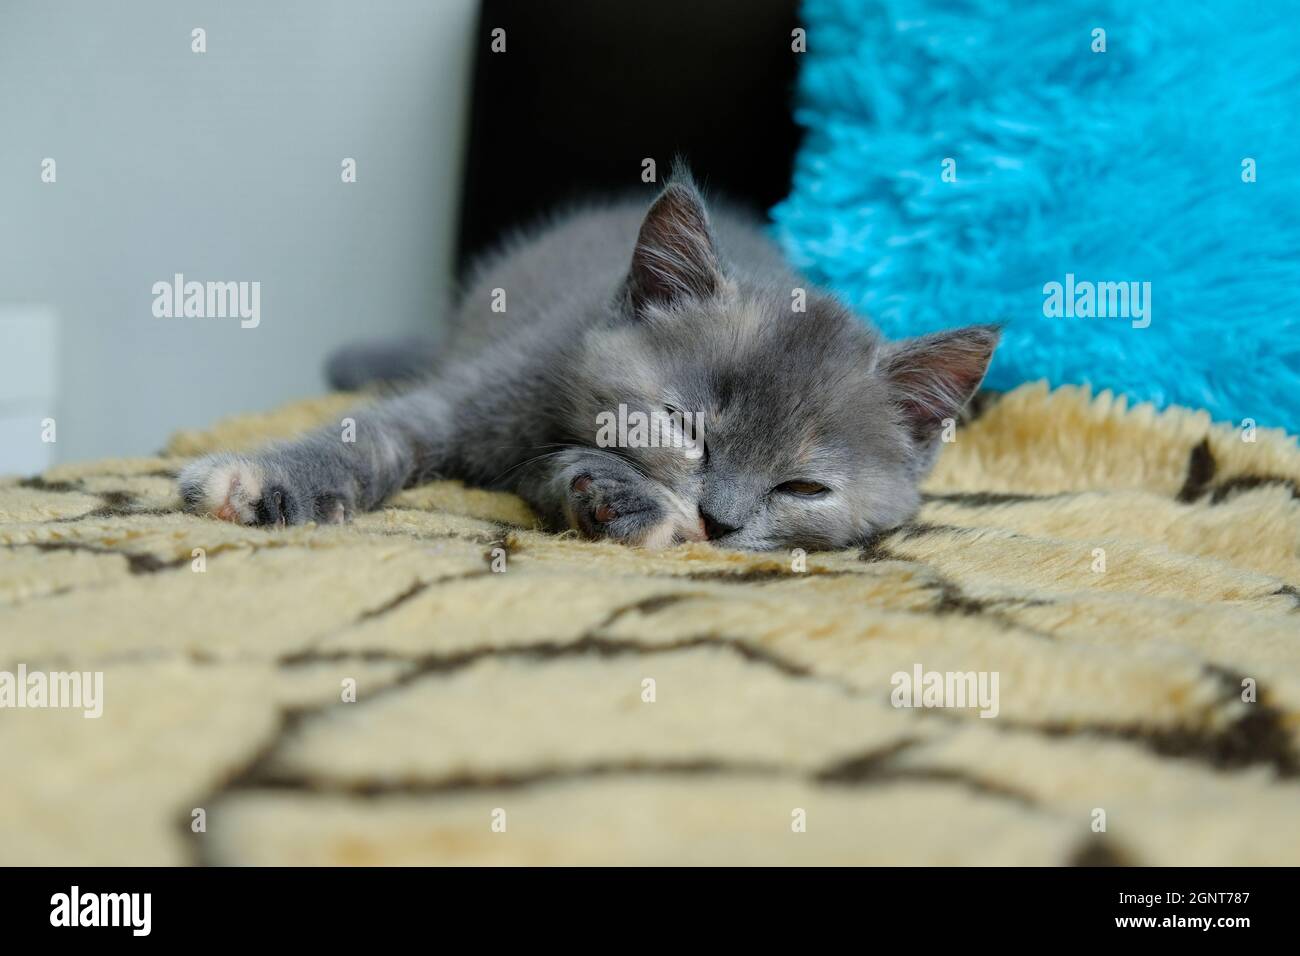 close-up of a small creamy British Shorthair cat napping on the sofa Stock Photo